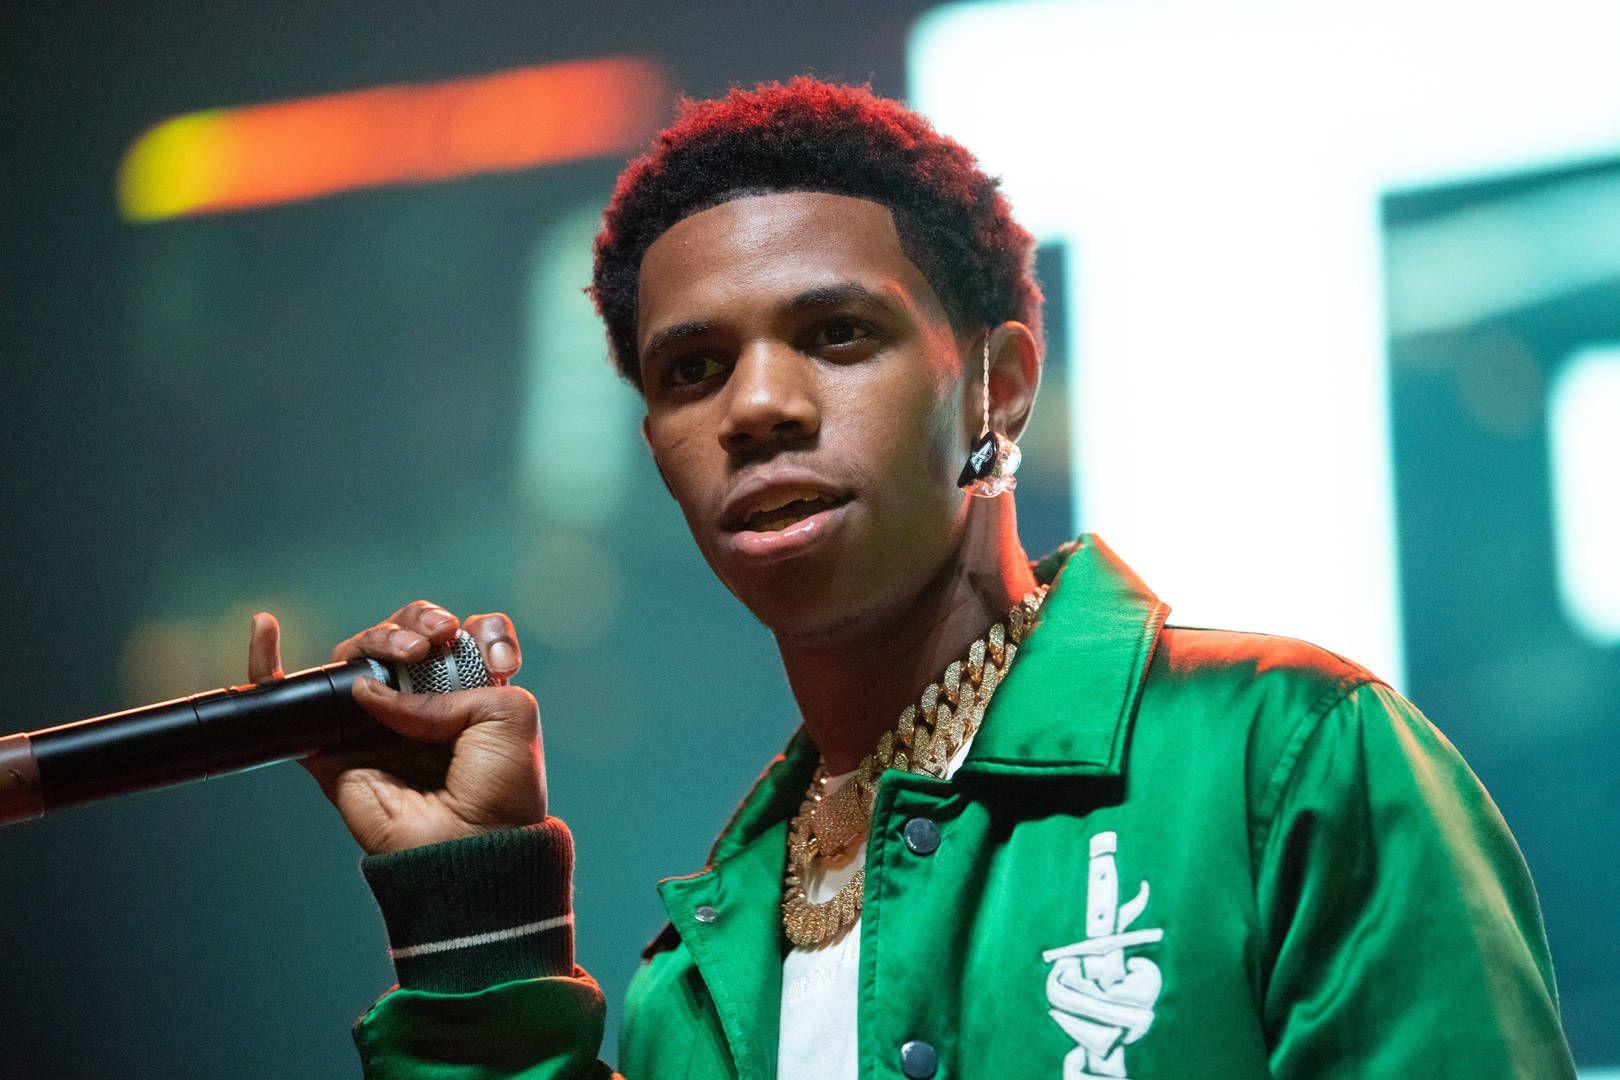 A Boogie wit da Hoodie Wallpaper APK for Android Download